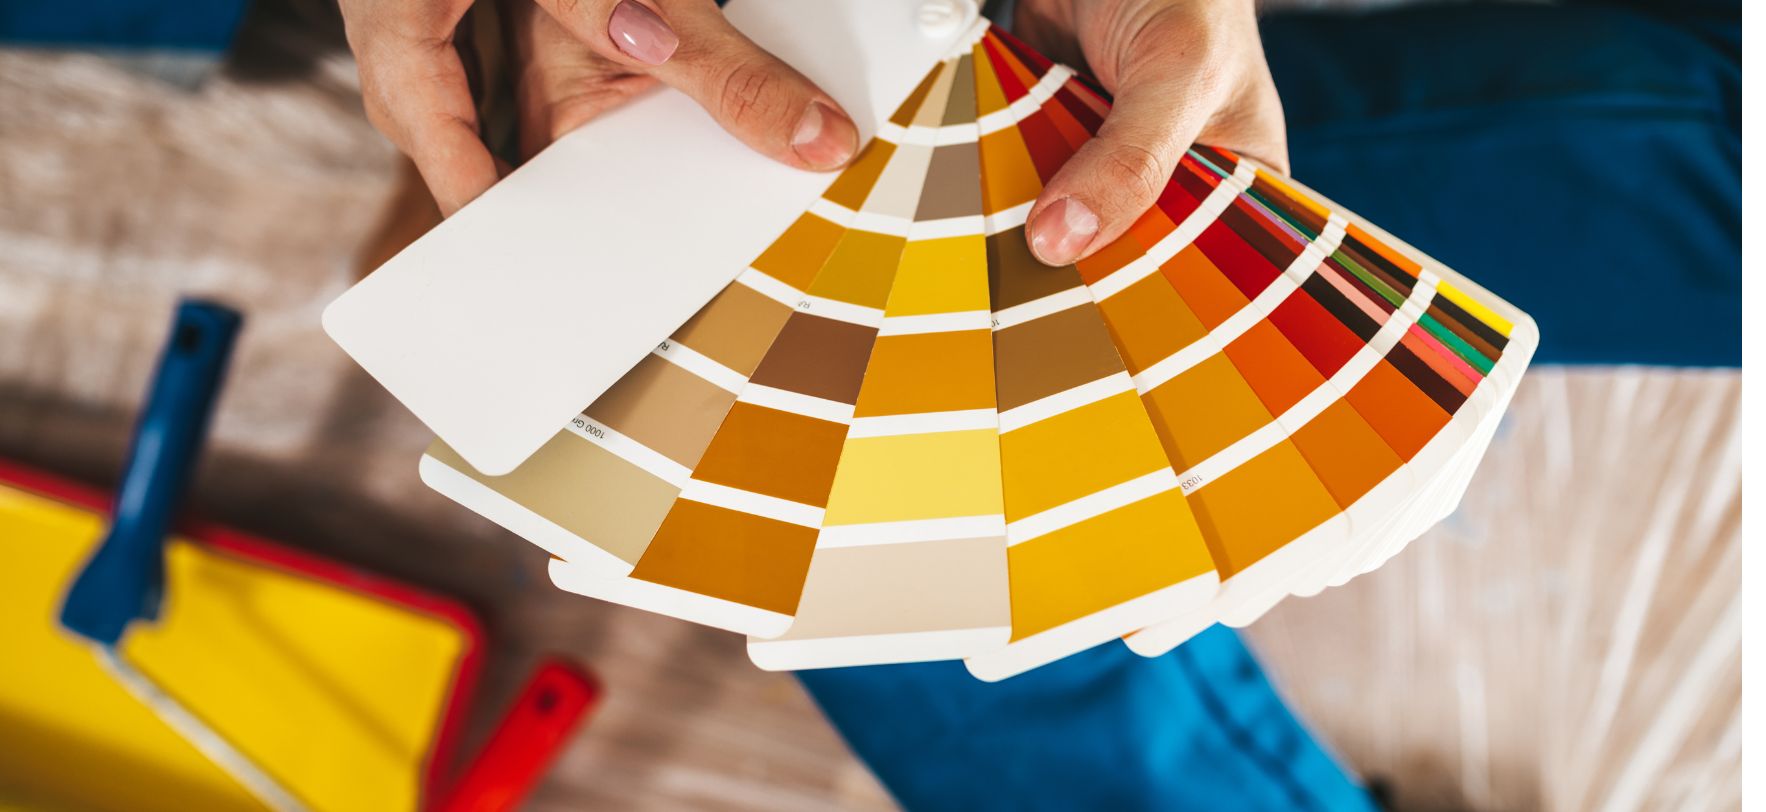 Wall painting service colors in Dubai